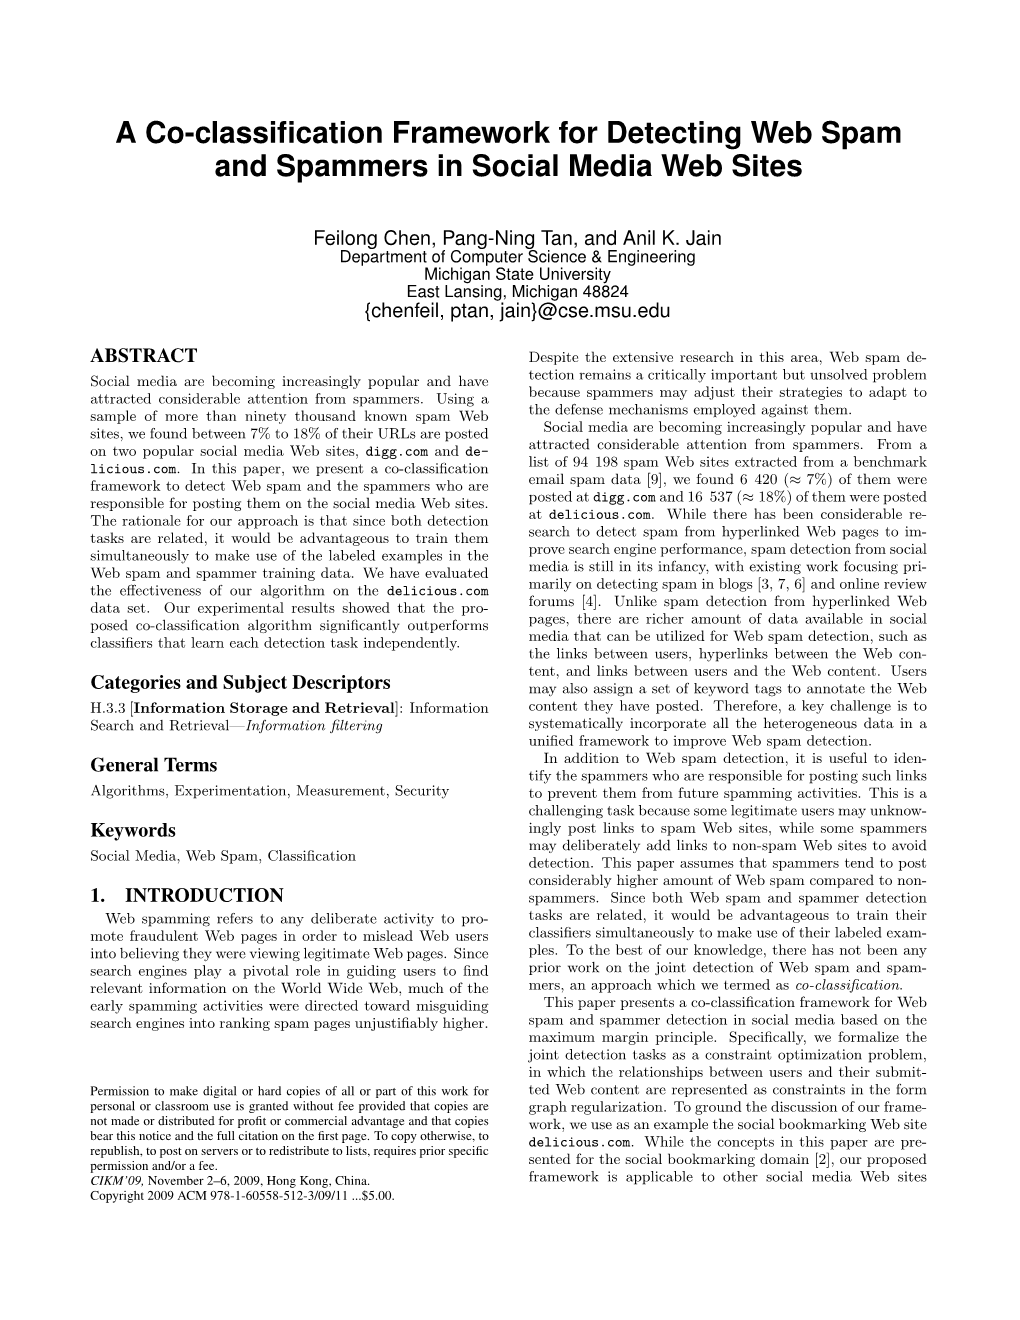 A Co-Classification Framework for Detecting Web Spam